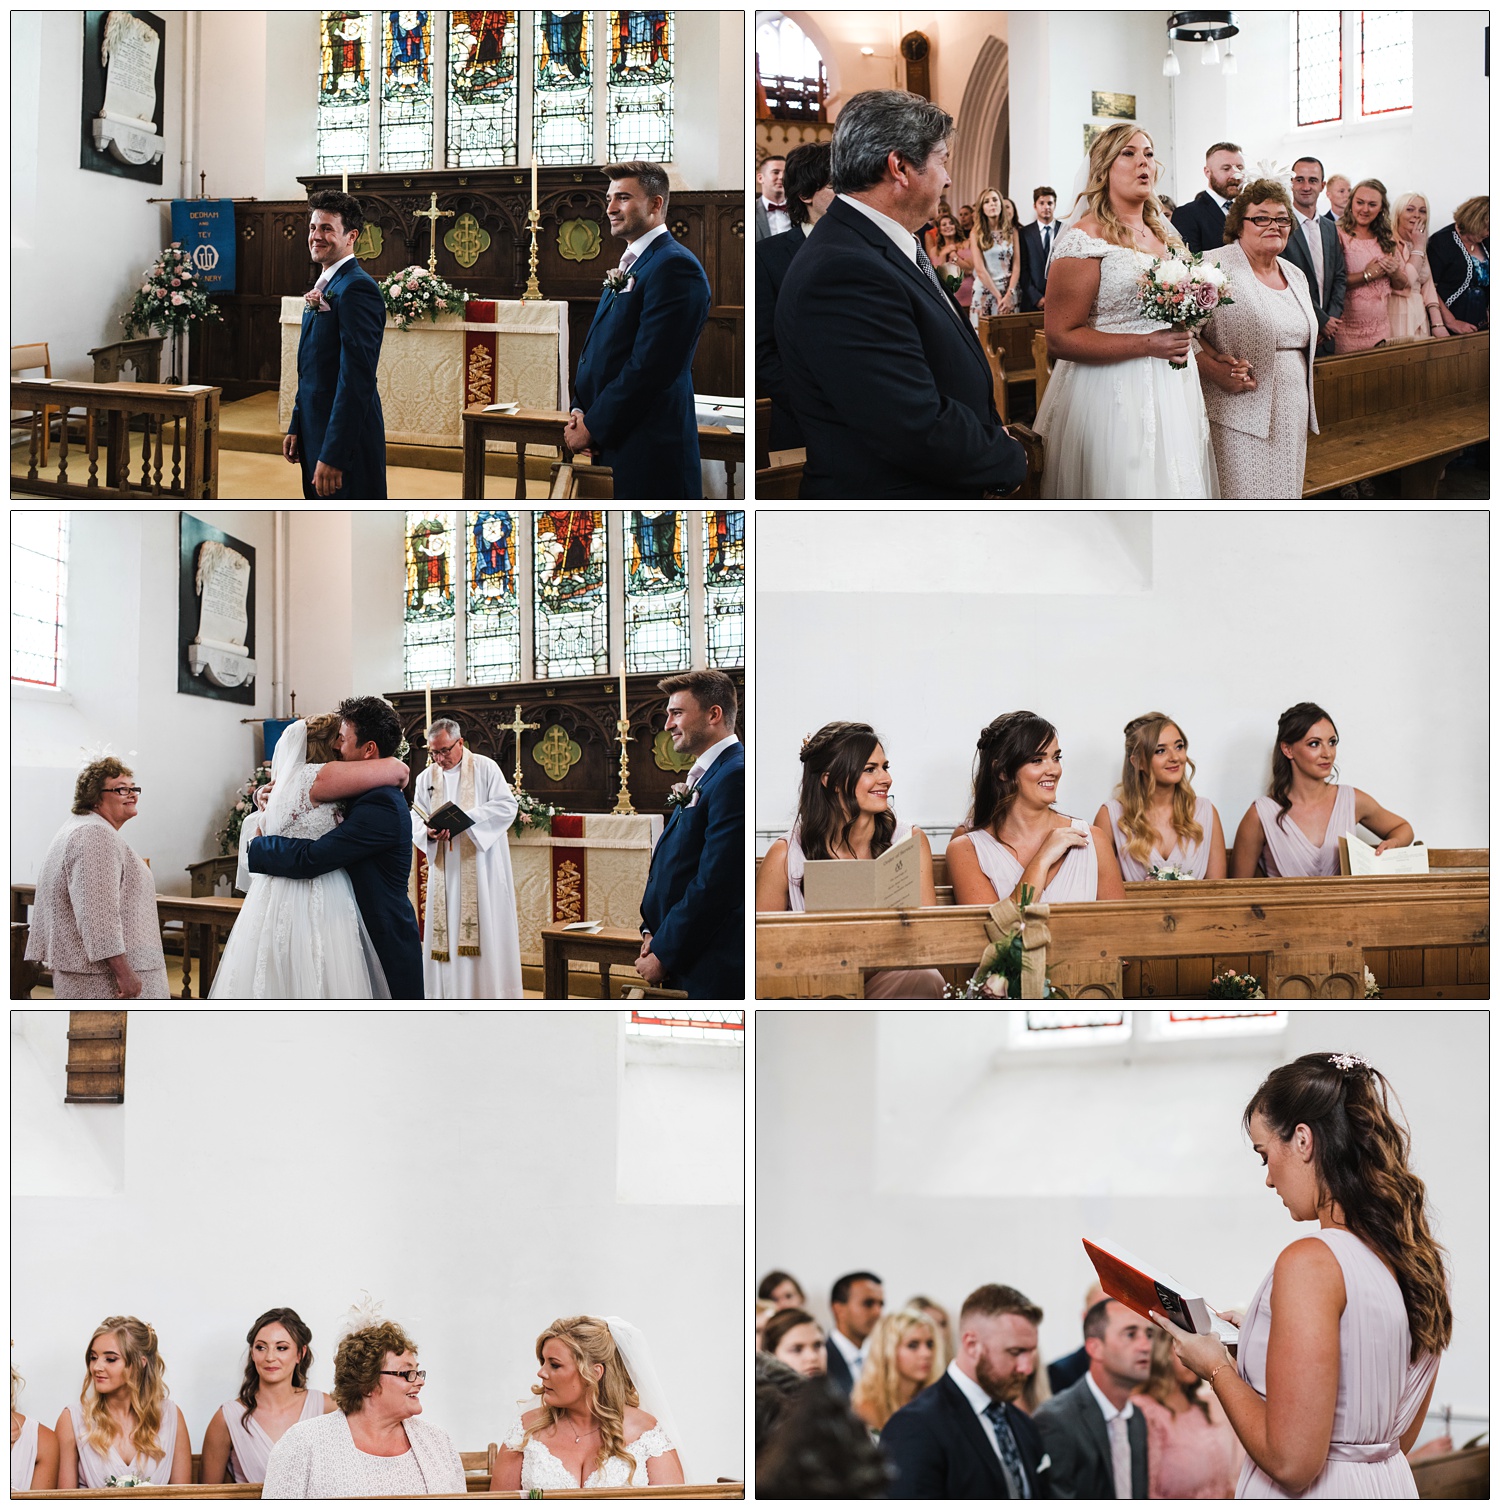 Scenes from inside St Barnabas church in Great Tey during a wedding.